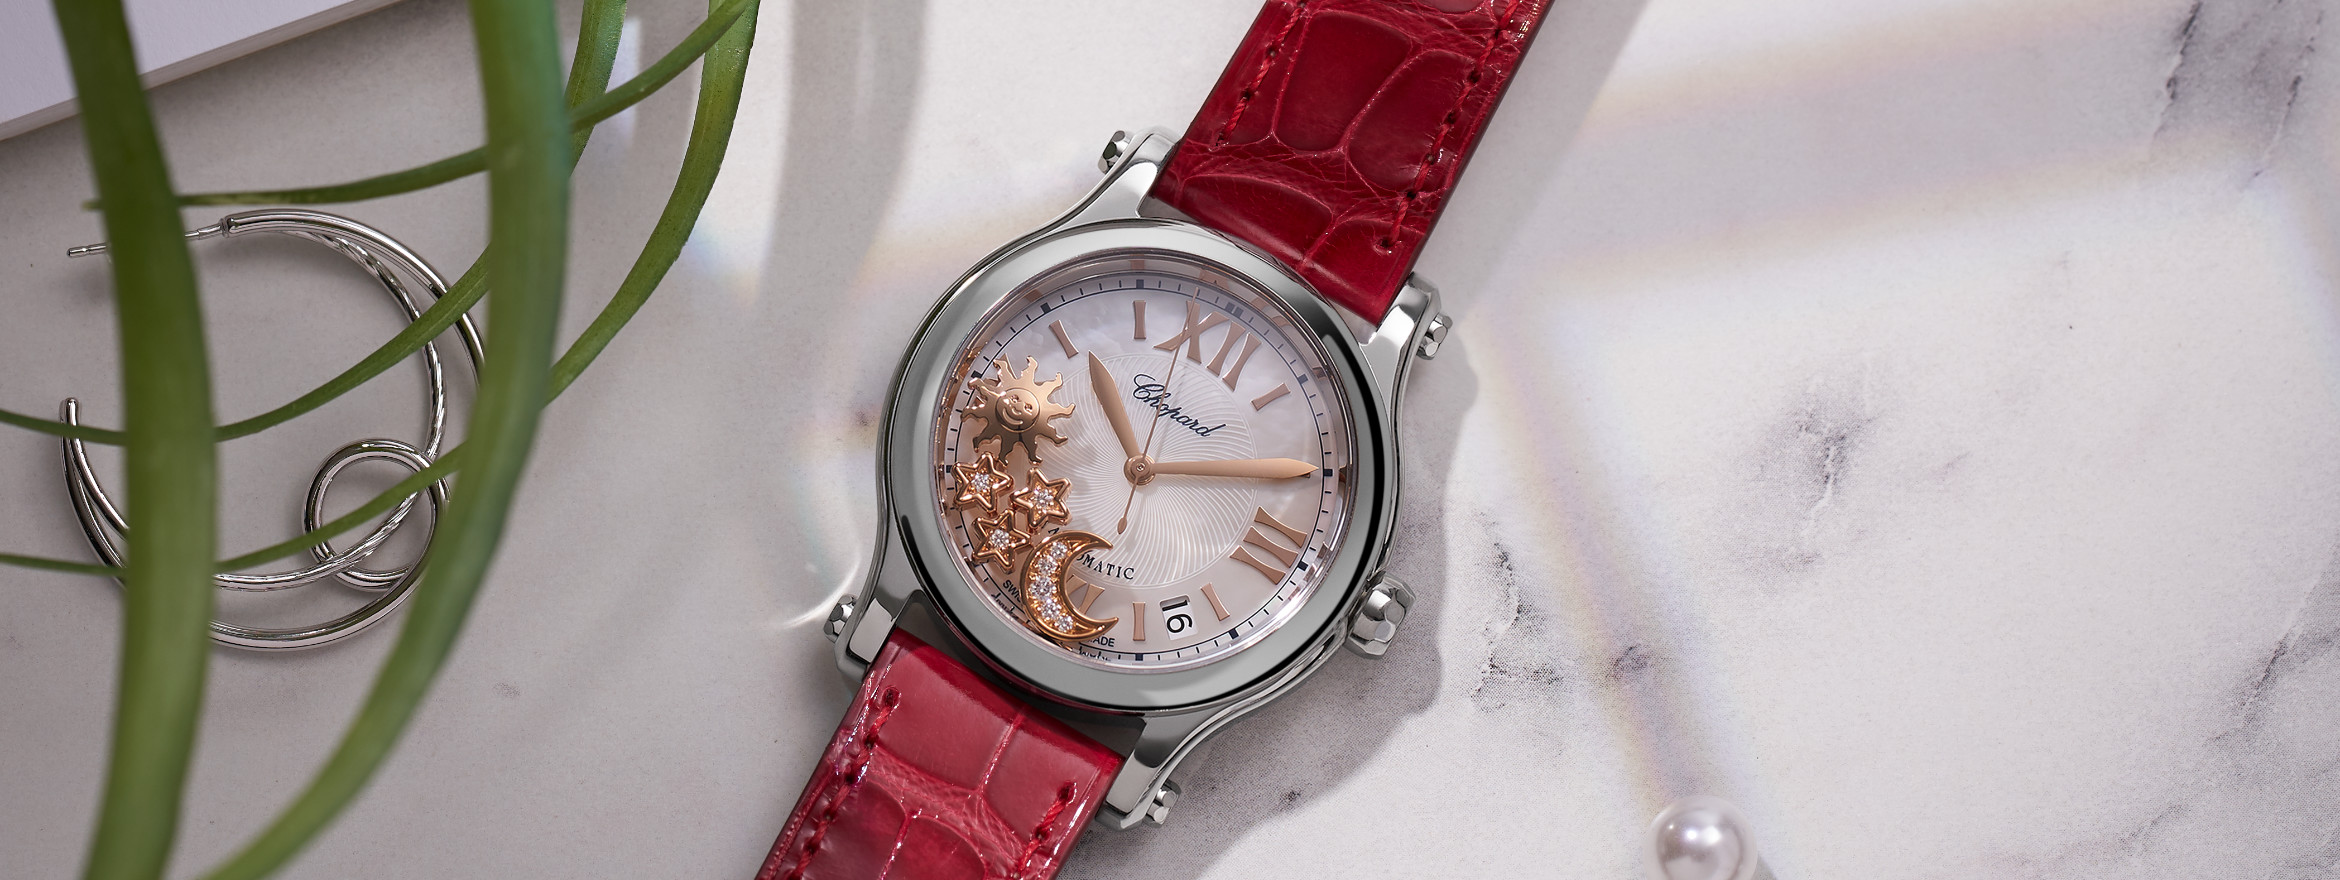 Chopard x The Hour Glass (Commemorative Watch)